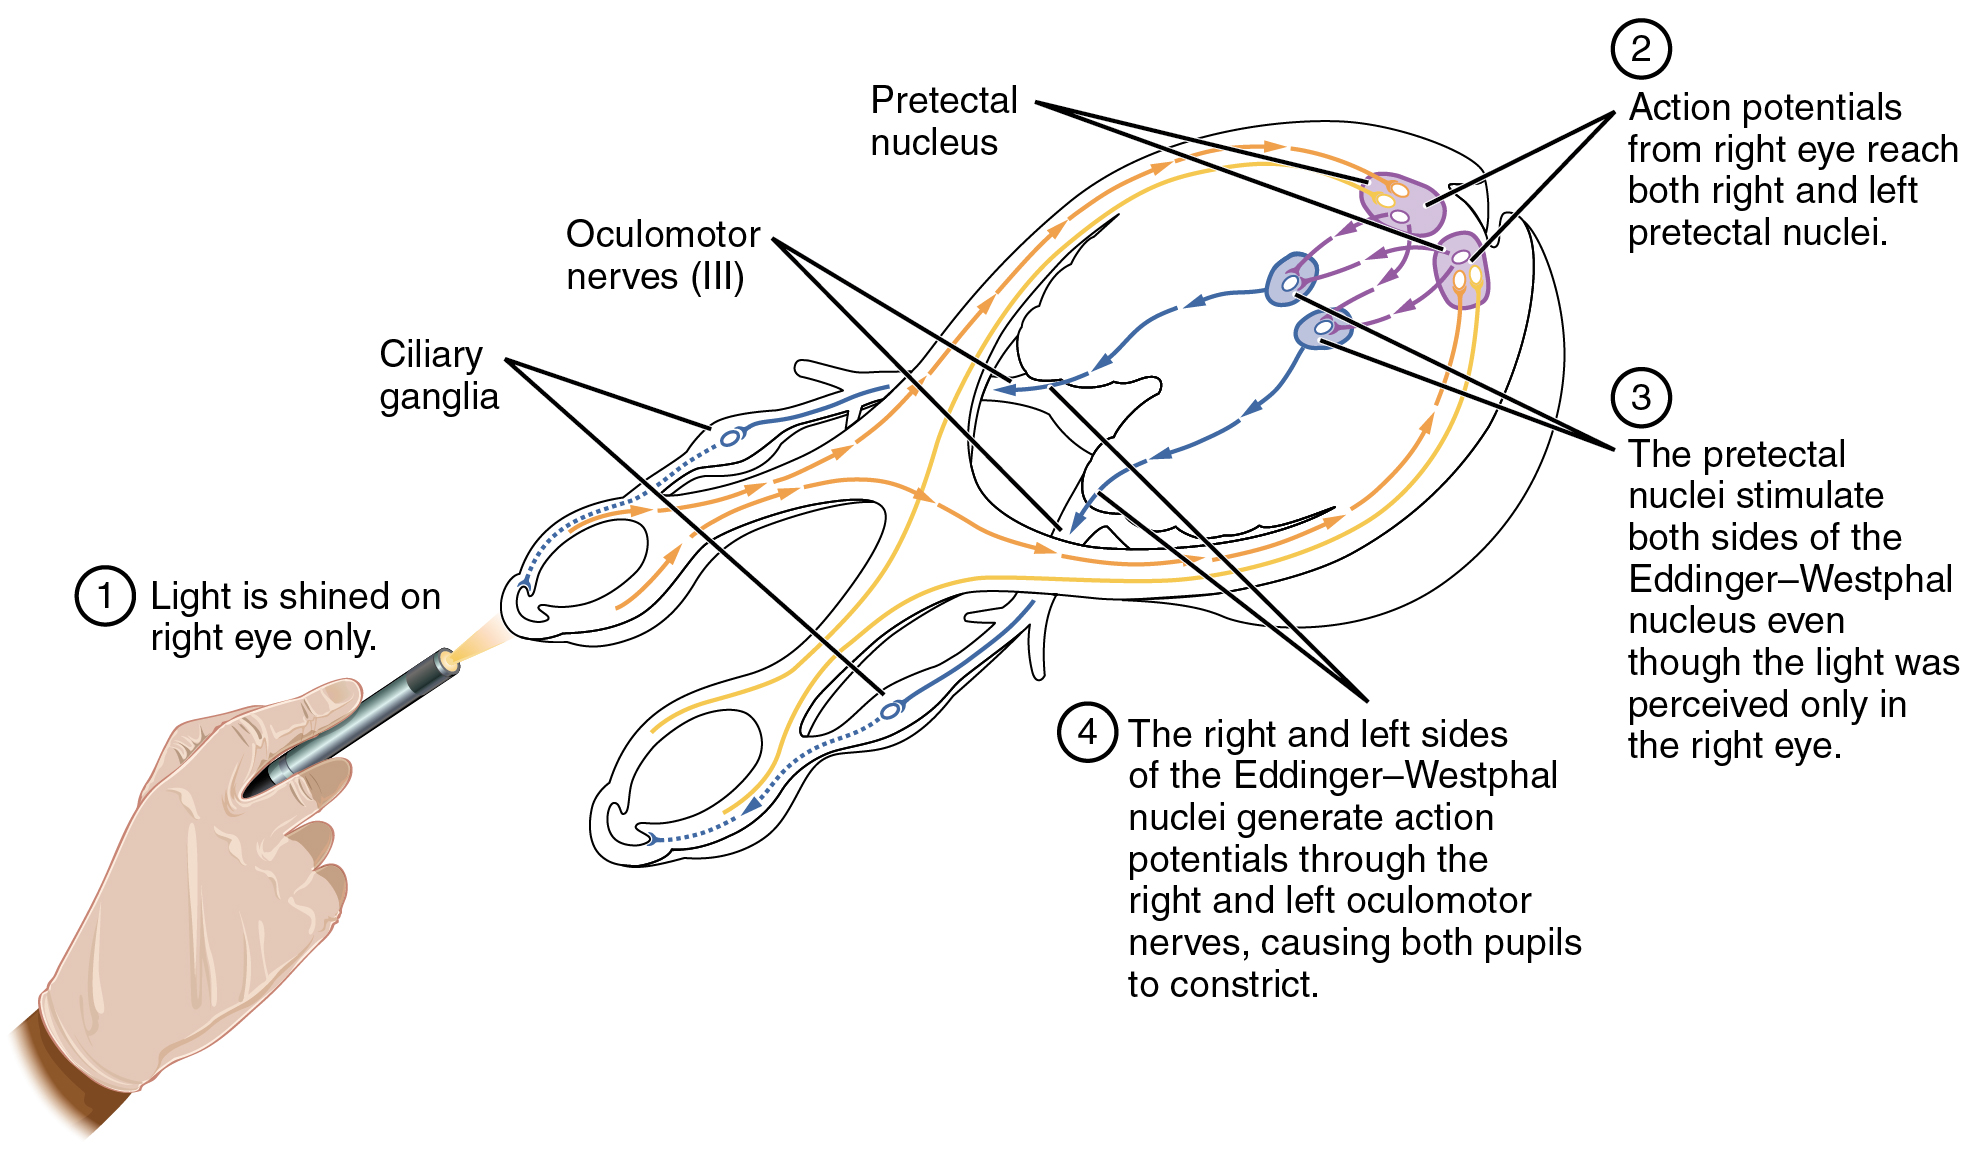 This diagram shows the connections between the different nerves and pathways in the eyes. A hand is shown shining a light on the right eye, and arrows and text callouts indicate the different pathways that are activated.